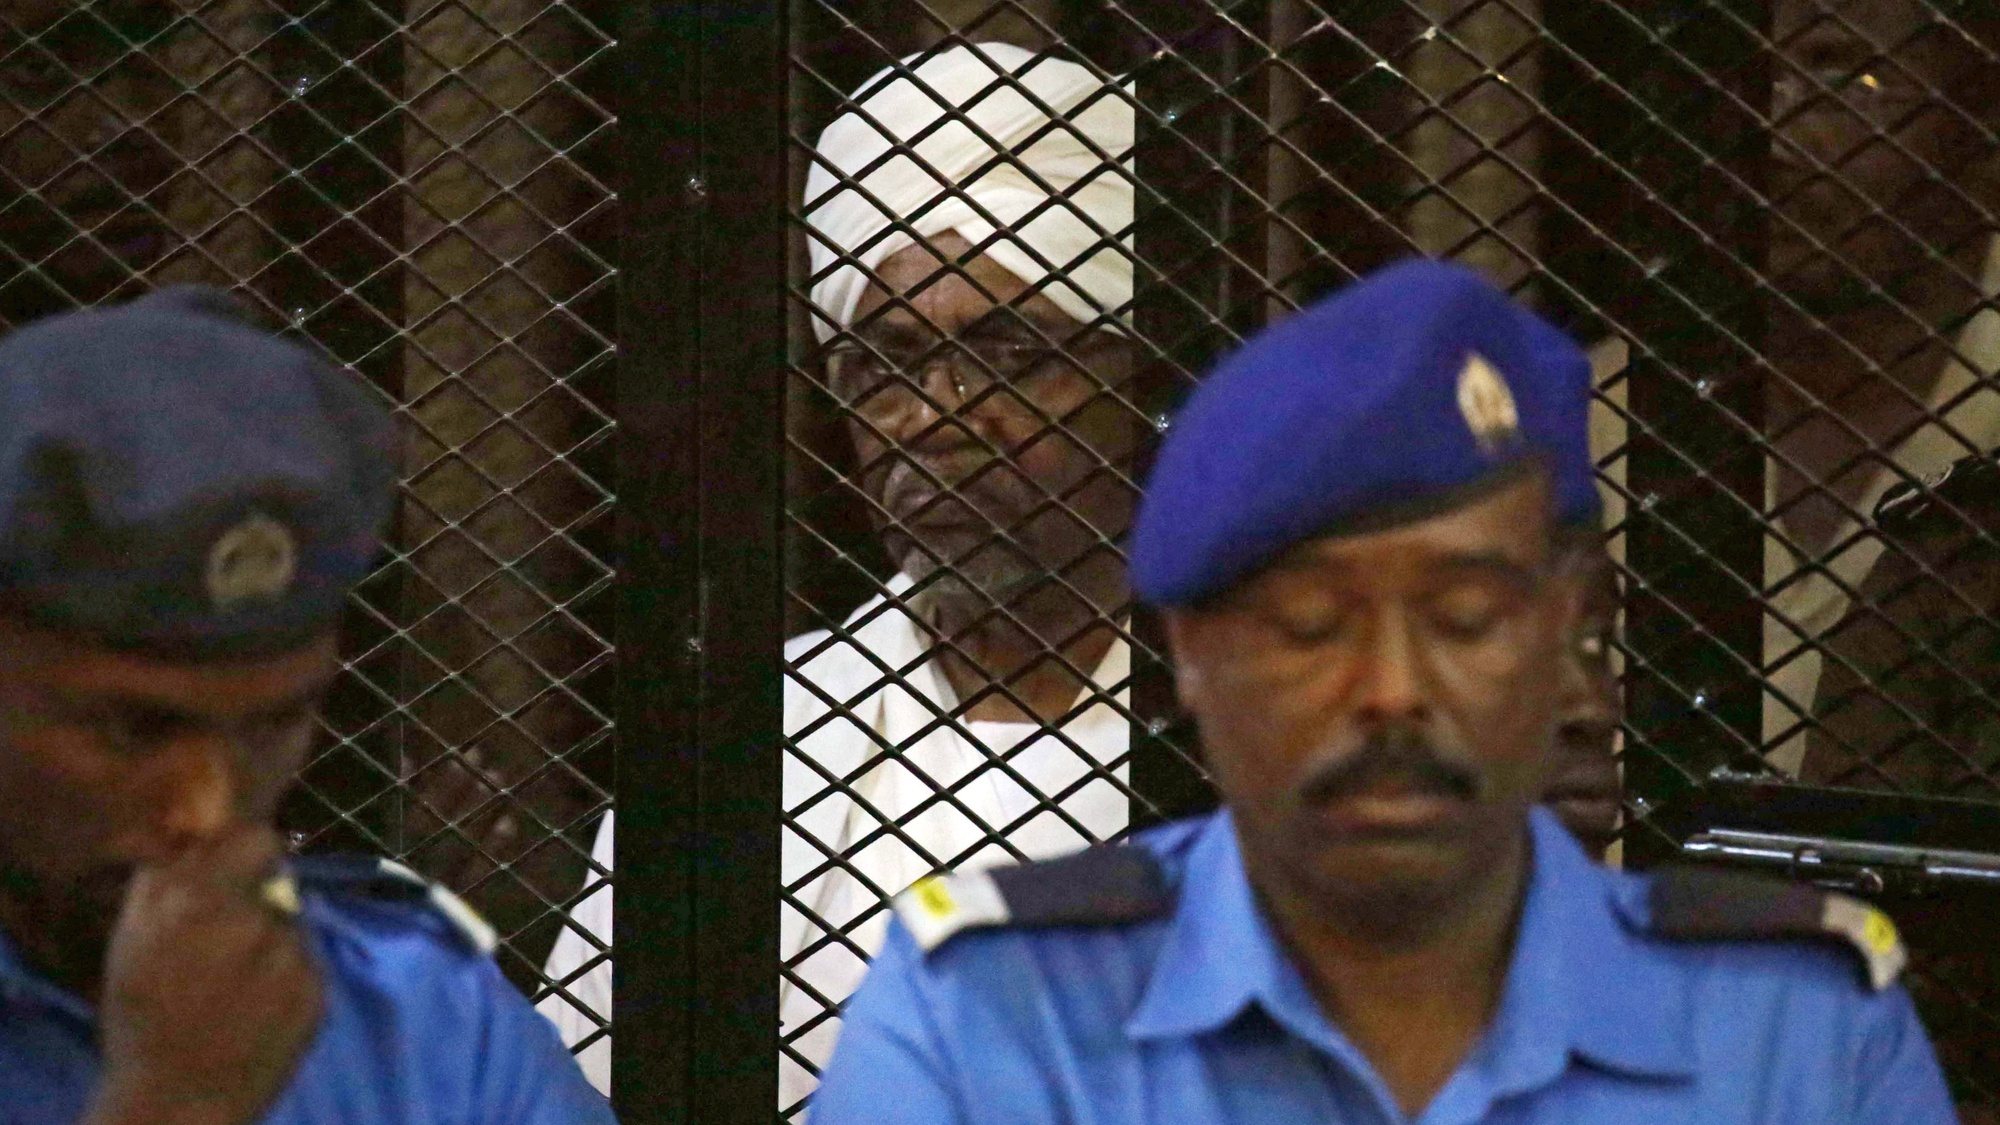 epa08211253 (FILE) - Sudan&#039;s ousted president Omar Hassan al-Bashir sits in the defendant&#039;s cage during his trial in Khartoum, Sudan, 14 December 2019 (reissued 11 February 2020). According to reports on 11 February 2020, Sudanese authorities will hand ousted president Omar al-Bashir to the International Criminal Court (ICC), where he will be facing charges of war crimes and crimes against humanity related to the war in the Darfur region.  EPA/MORWAN ALI *** Local Caption *** 55708364